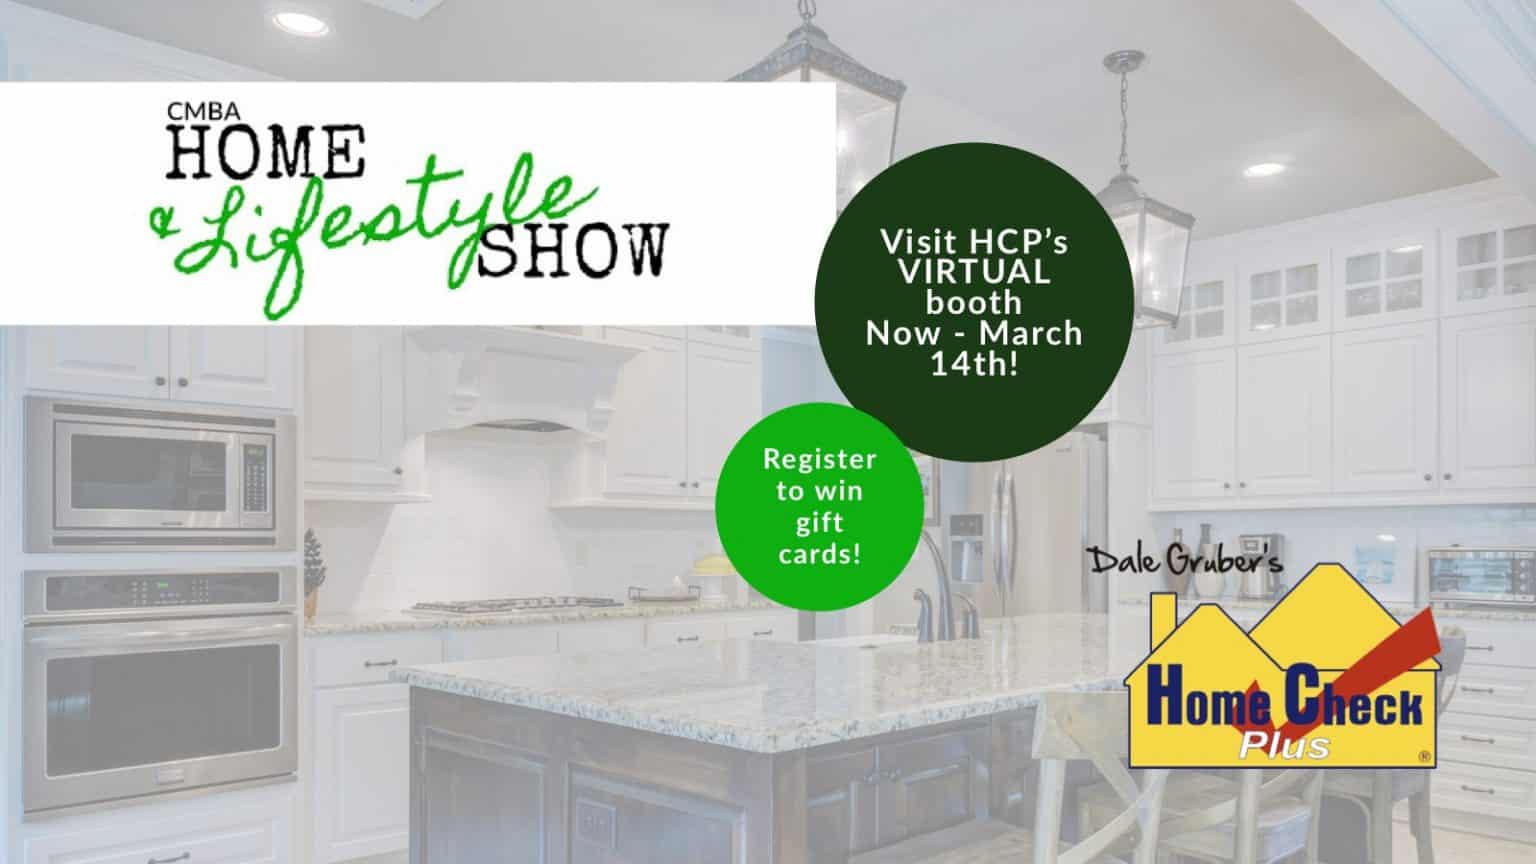 CMBA Home and Lifestyle Show